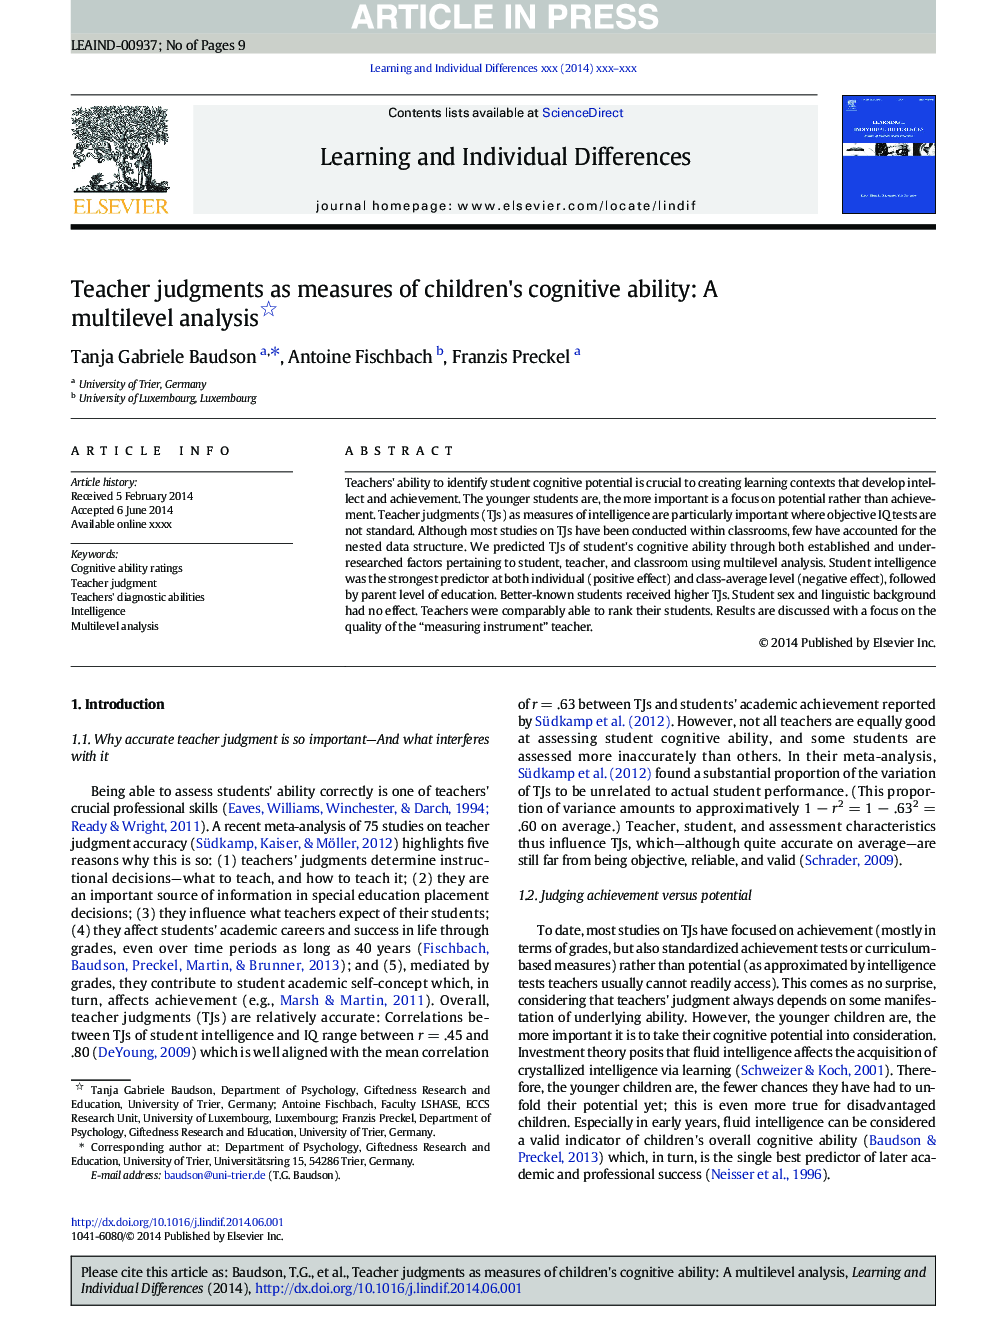 Teacher judgments as measures of children's cognitive ability: A multilevel analysis